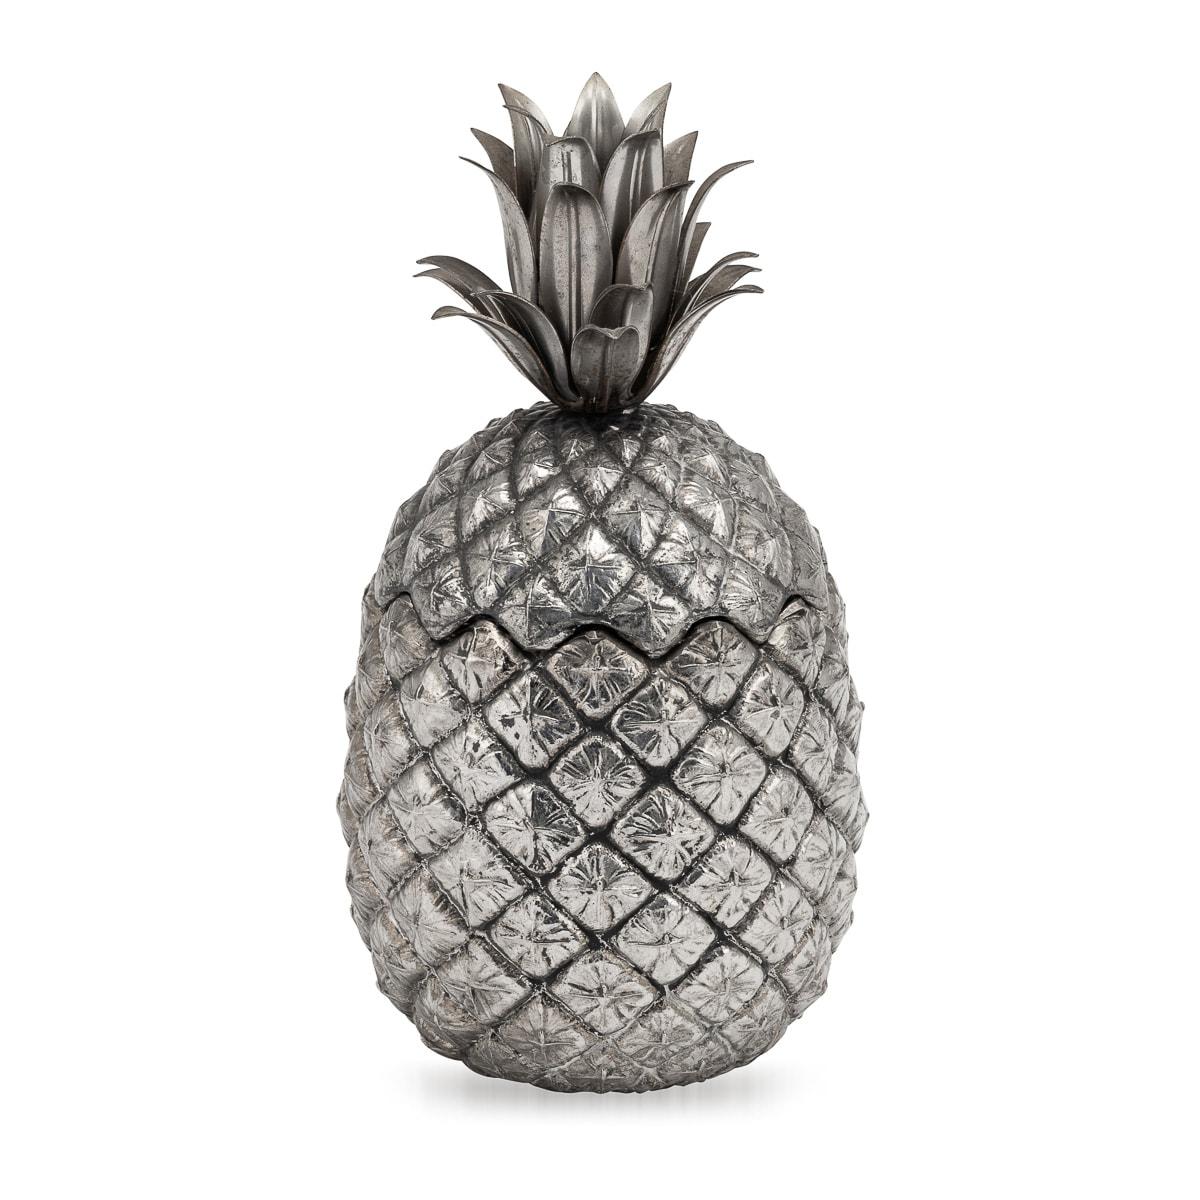 Italian 20th Century Silver Plated Pineapple Ice Bucket By Mauro Manetti, Italy c.1970